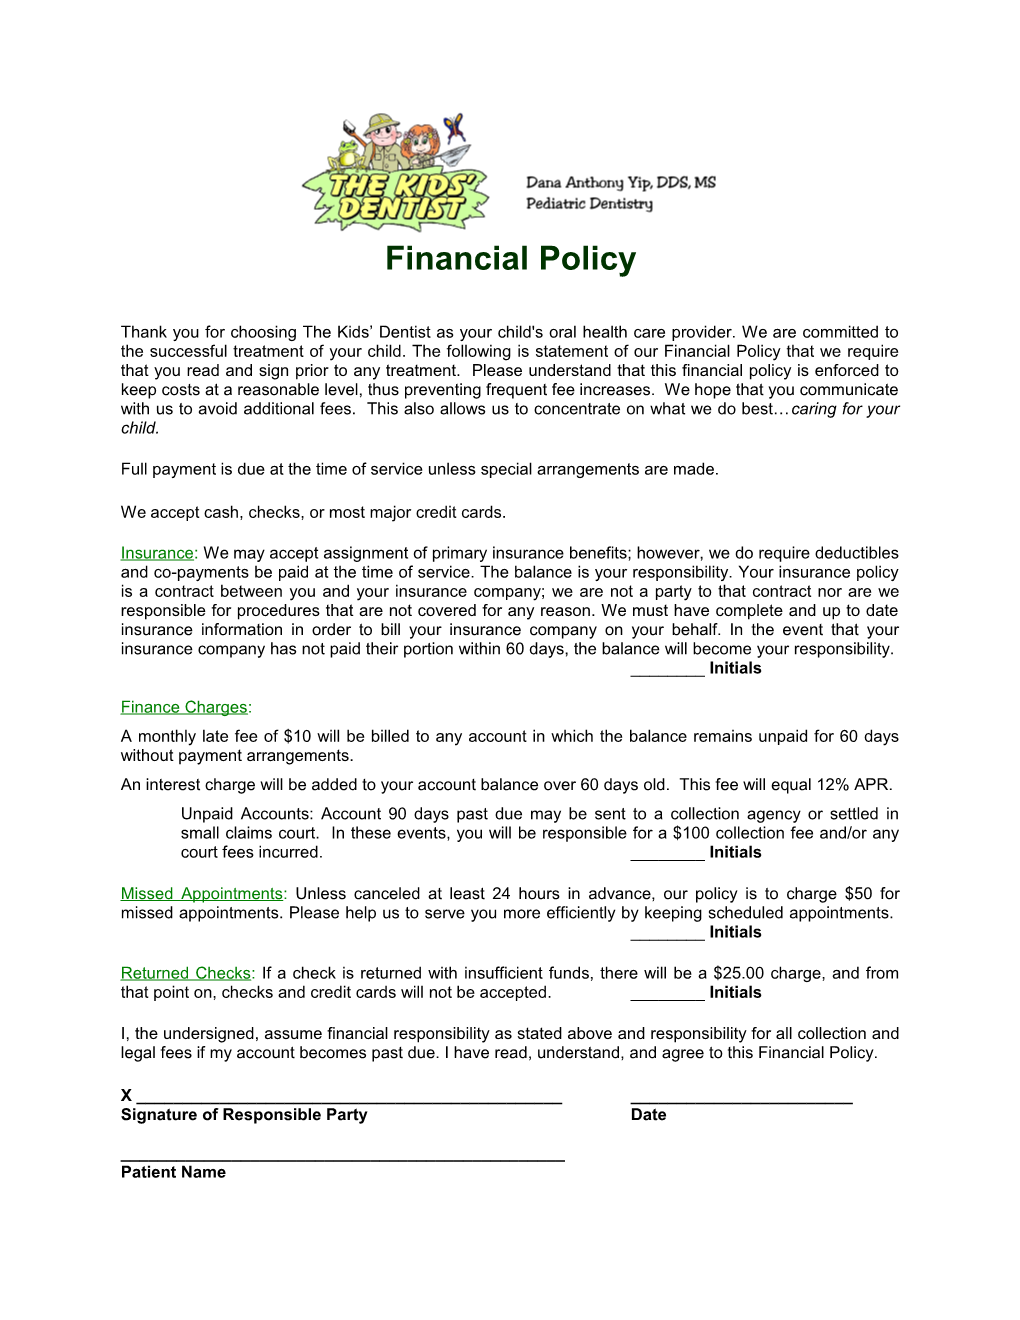 Financial Policy Printable Form Page 1 of 1